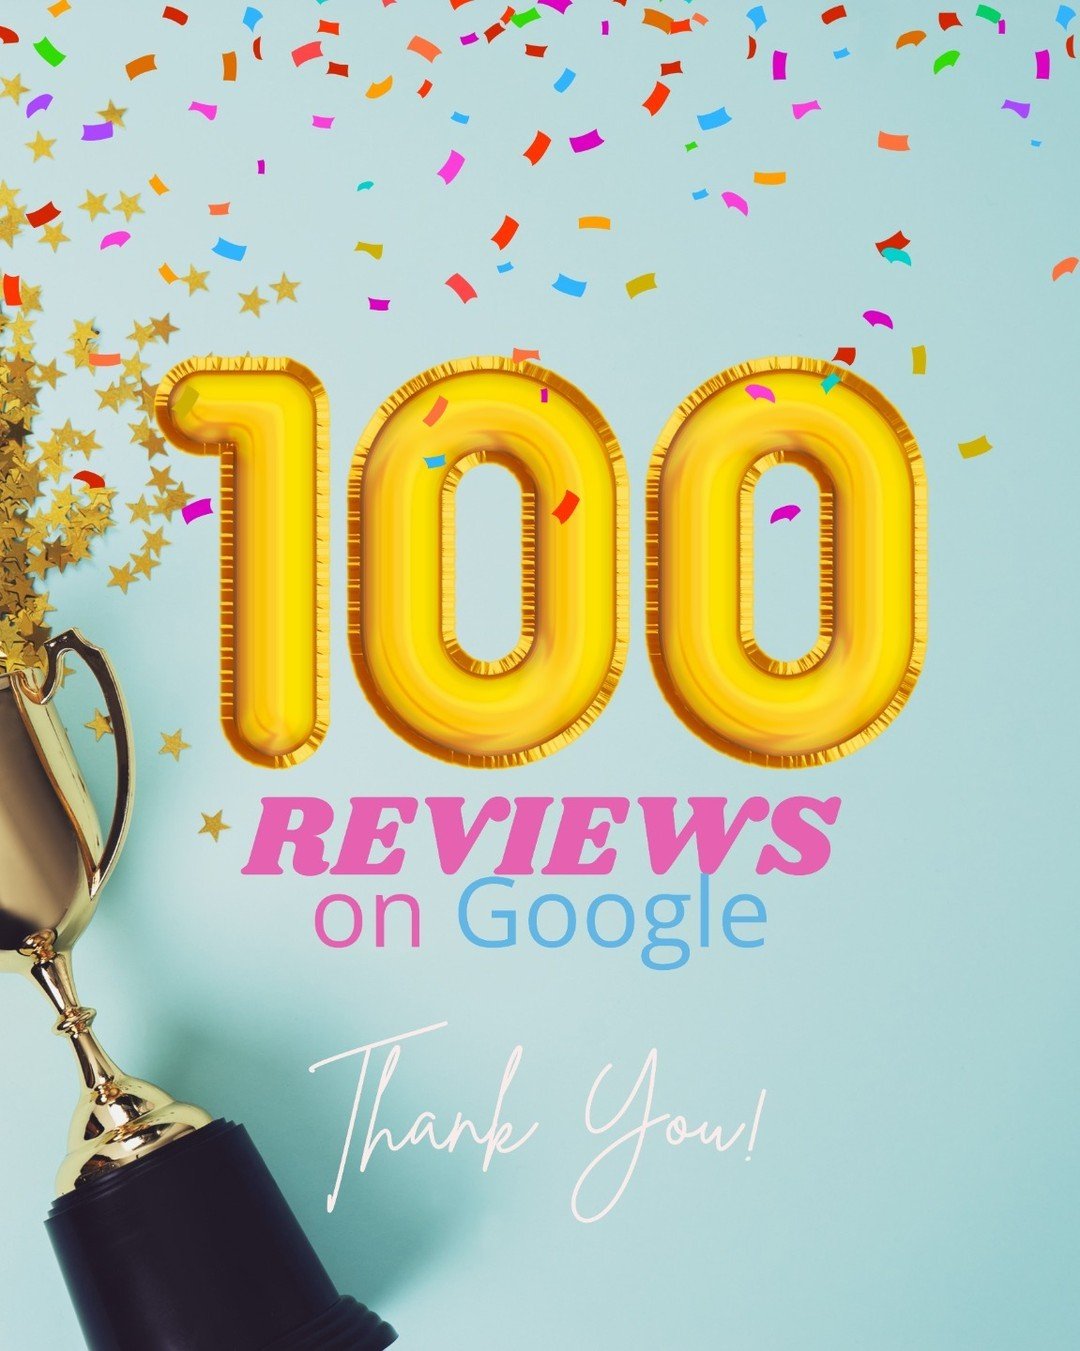 100 SHINY REVIEWS! We're overwhelmed with gratitude for your trust and amazing feedback! Reaching 100 Google reviews in less than a year wouldn't be possible without YOU, our incredible clients. Thank you for choosing us to keep your homes sparkling 